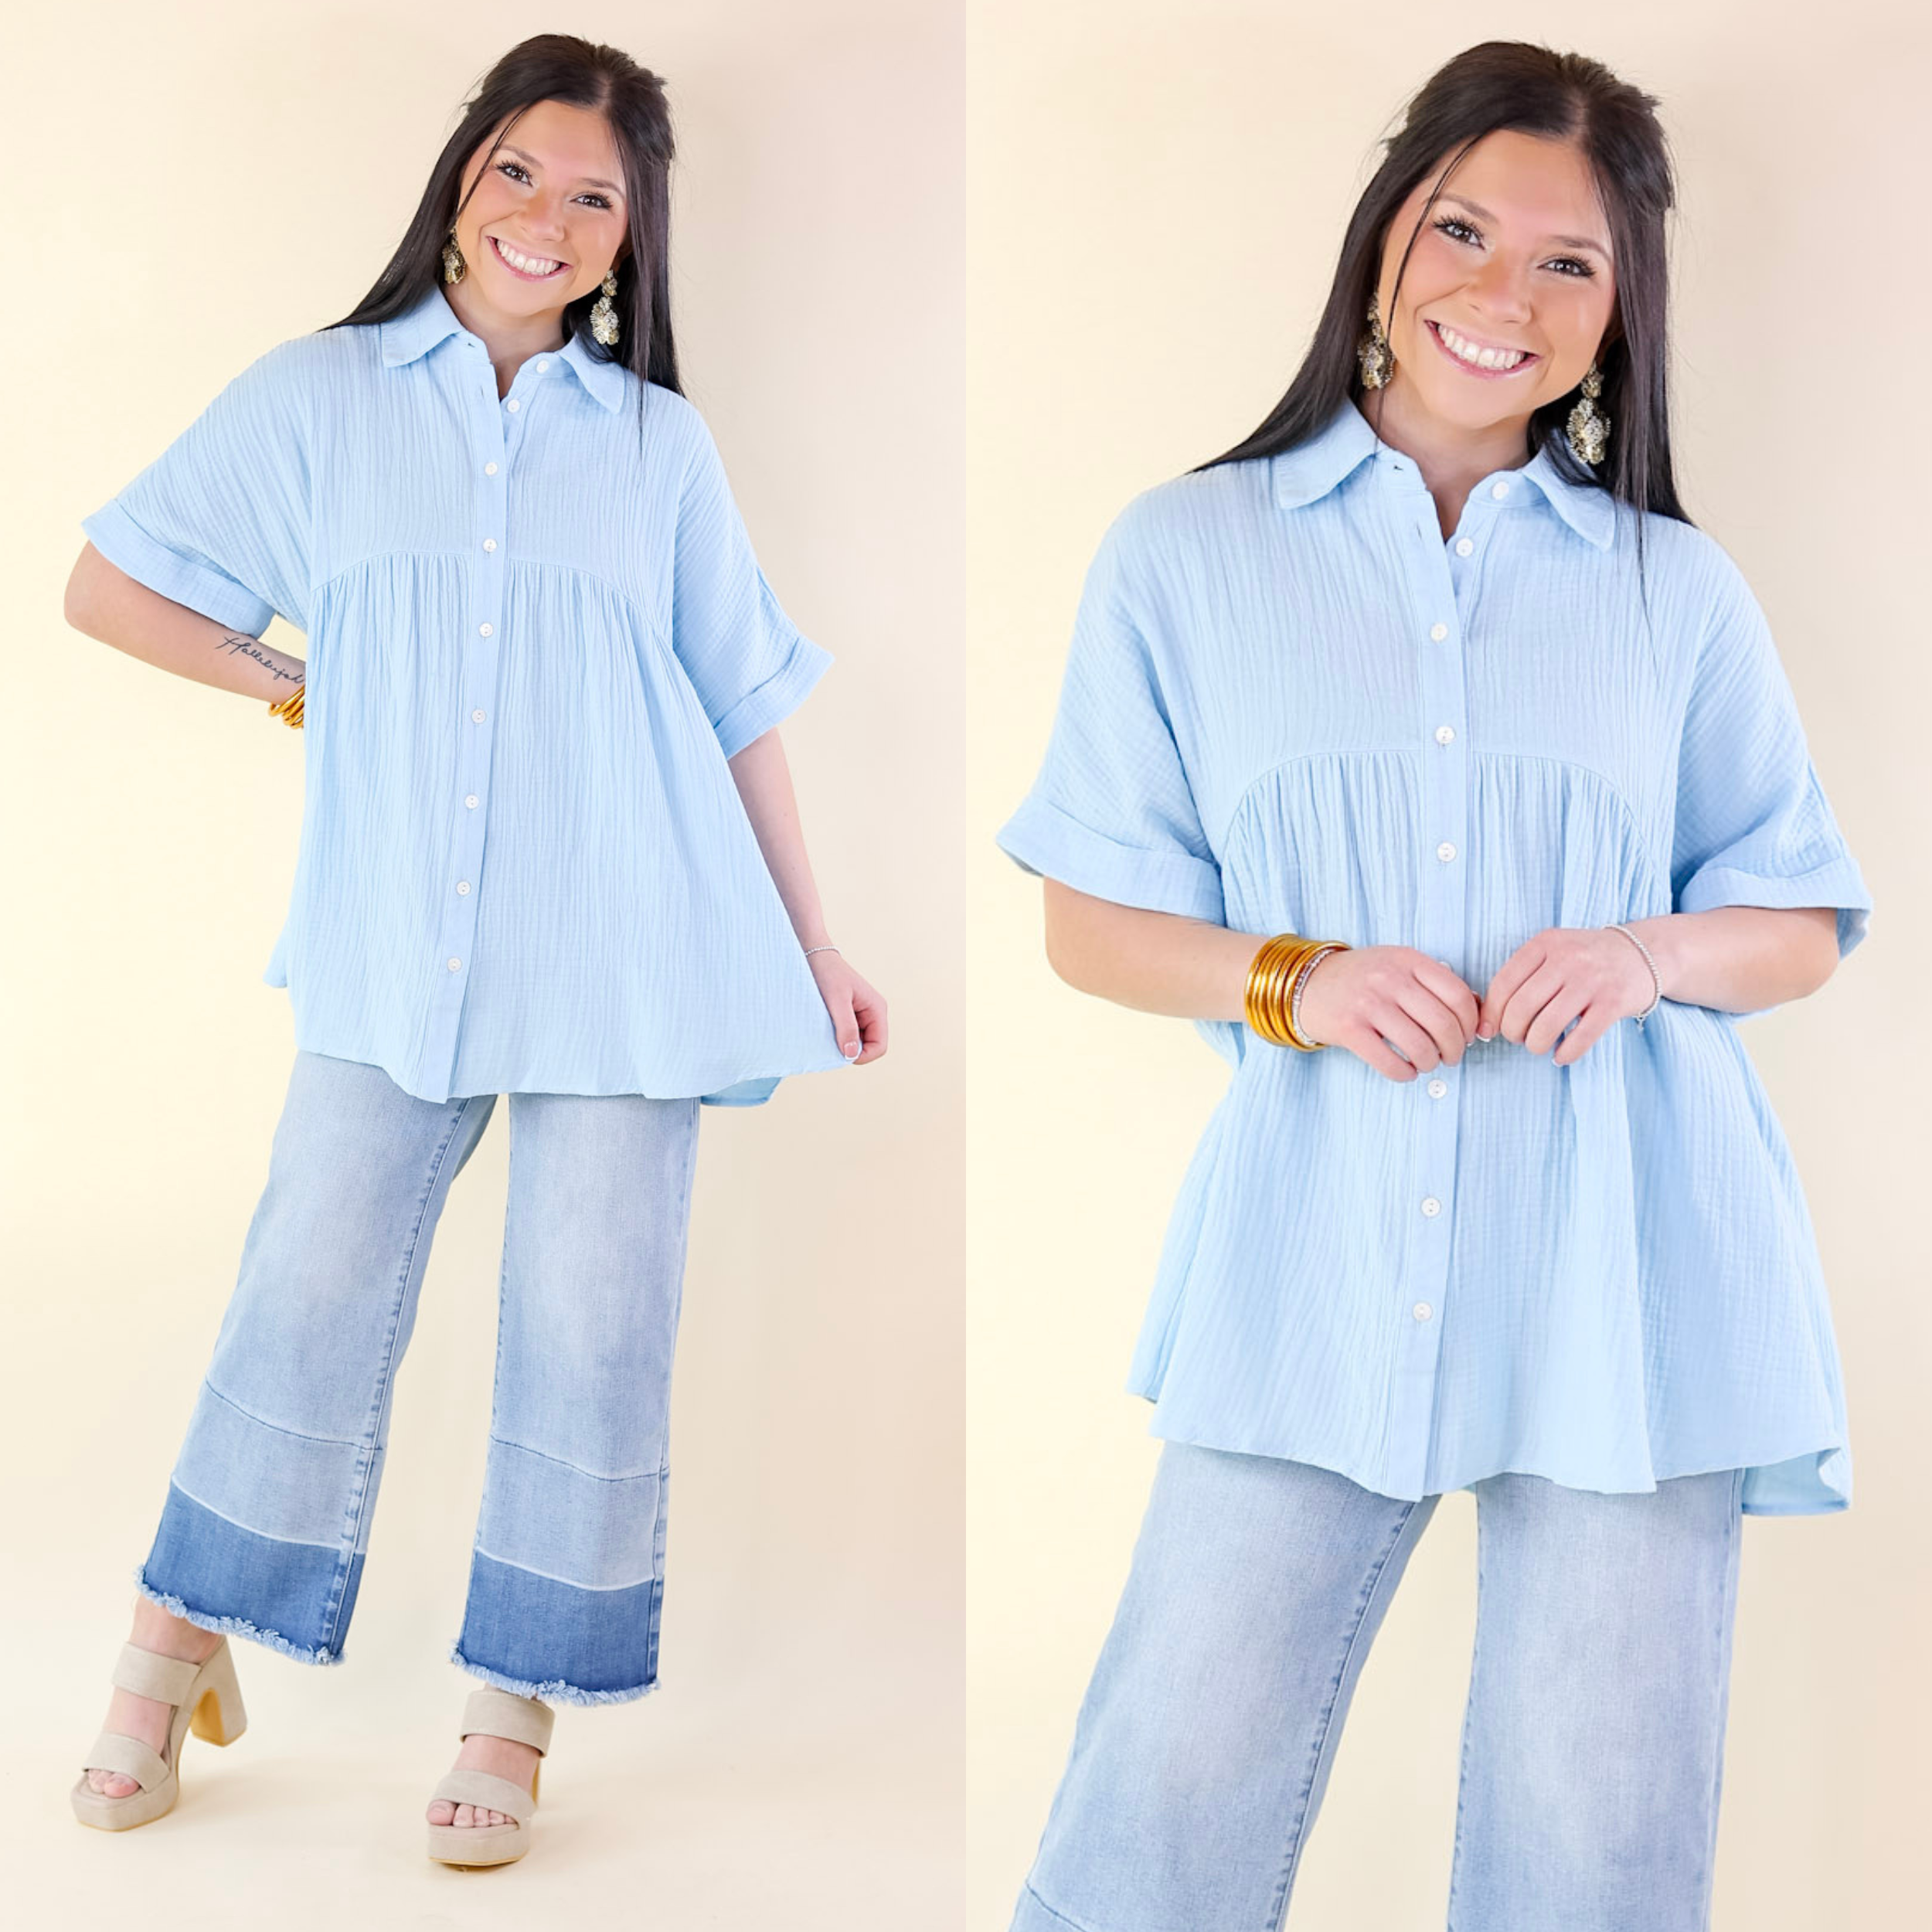 Vacation Vibes Collared Button Up Babydoll Top in Airy Blue - Giddy Up Glamour Boutique